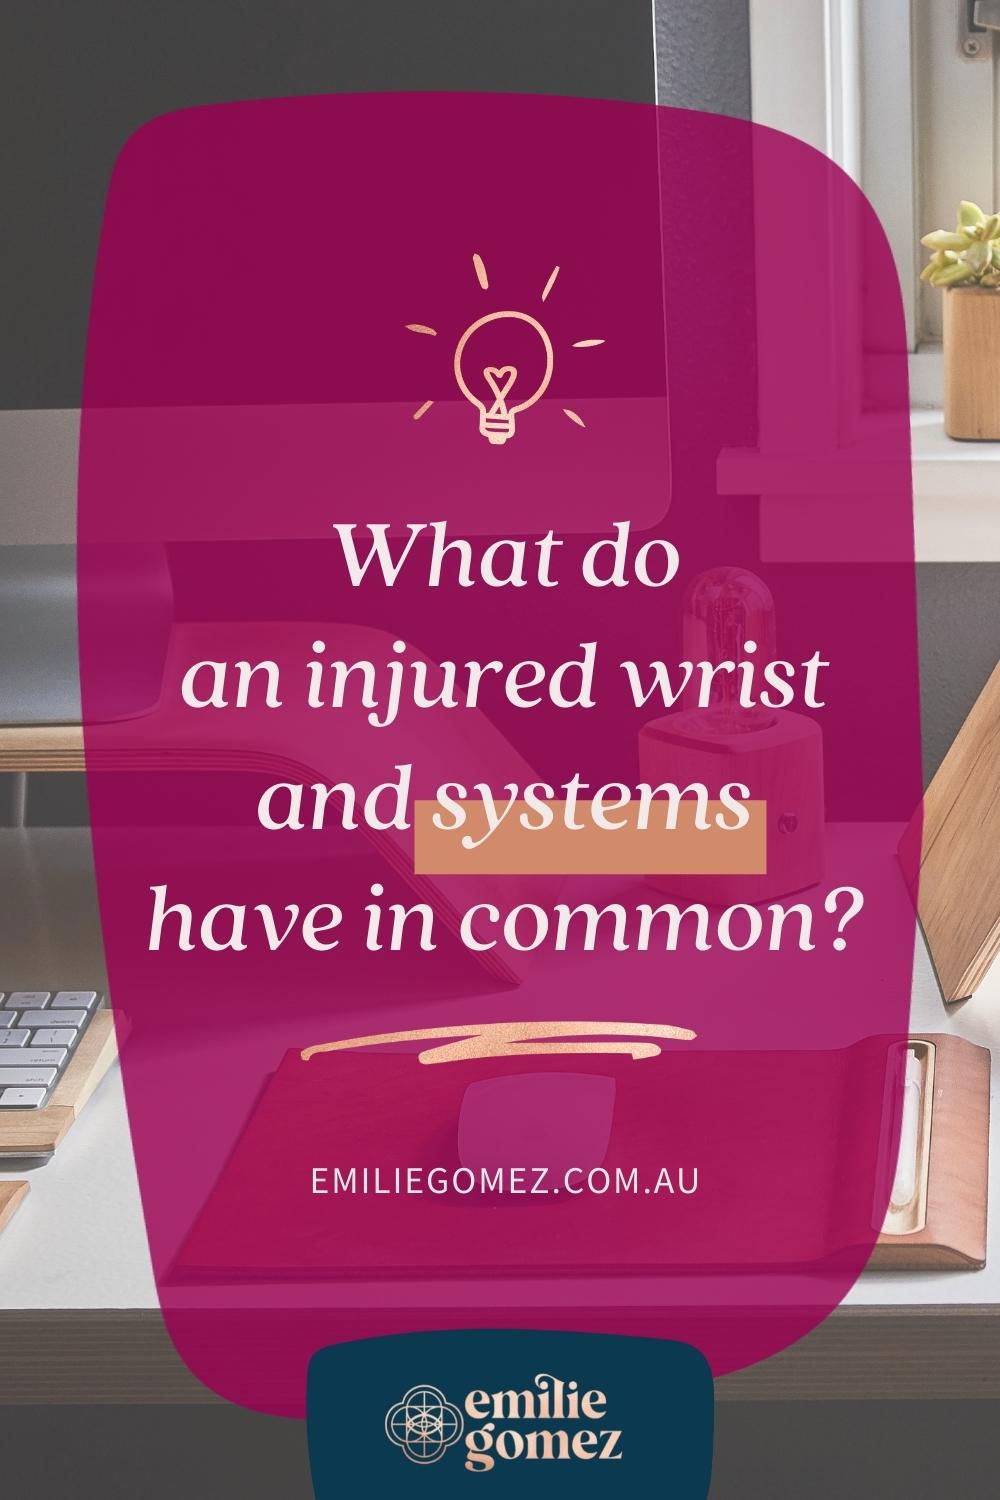 Here's an insight into how I applied the methodology I teach to all my clients about creating systems to my business after I hurt my wrist. #systems #ergonomics